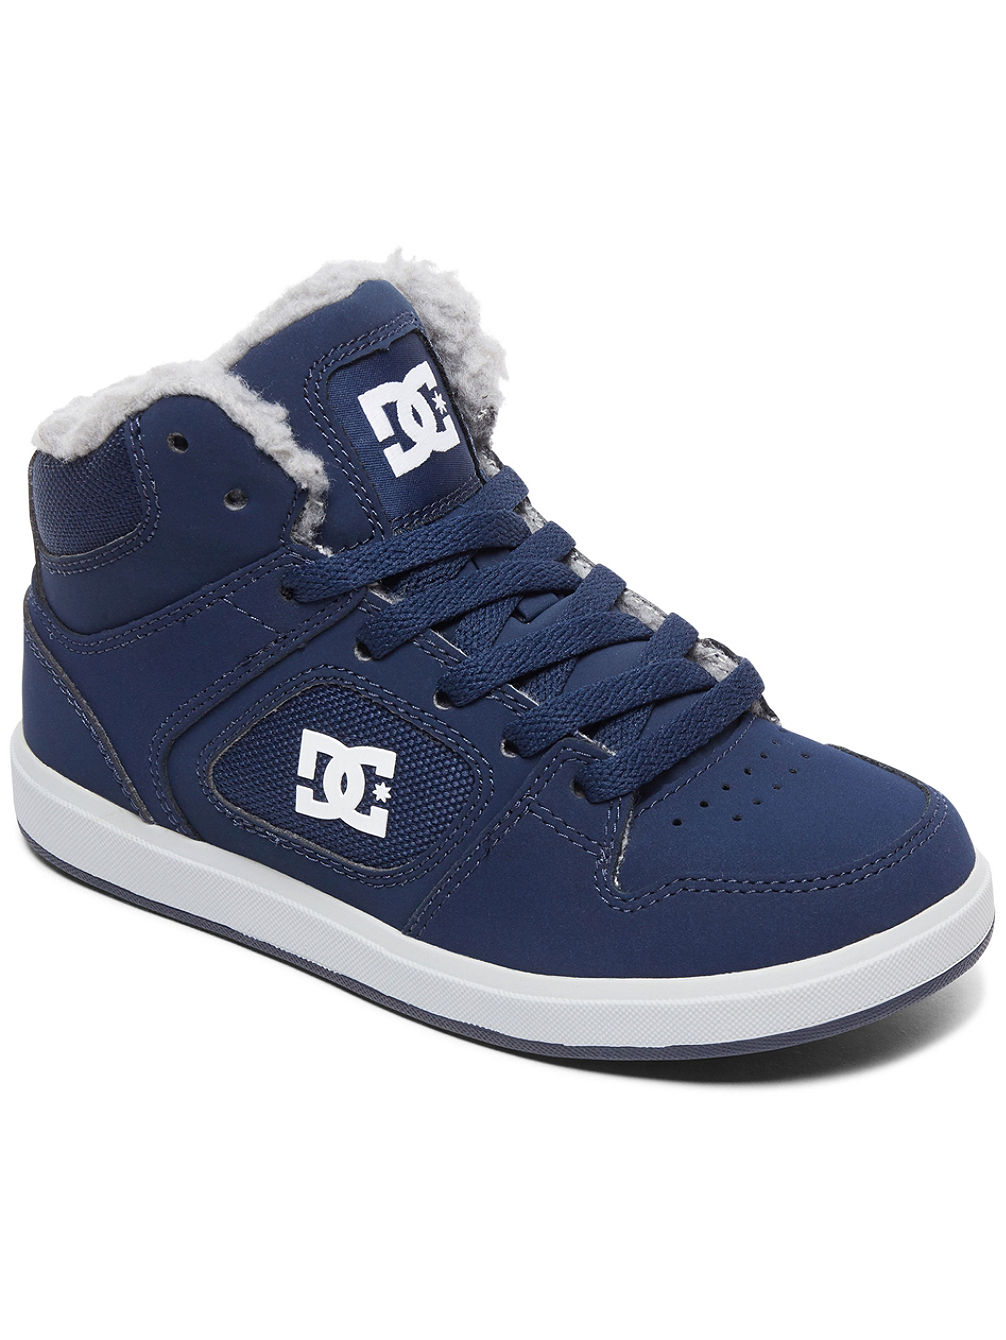 Union High Wnt Sneakers